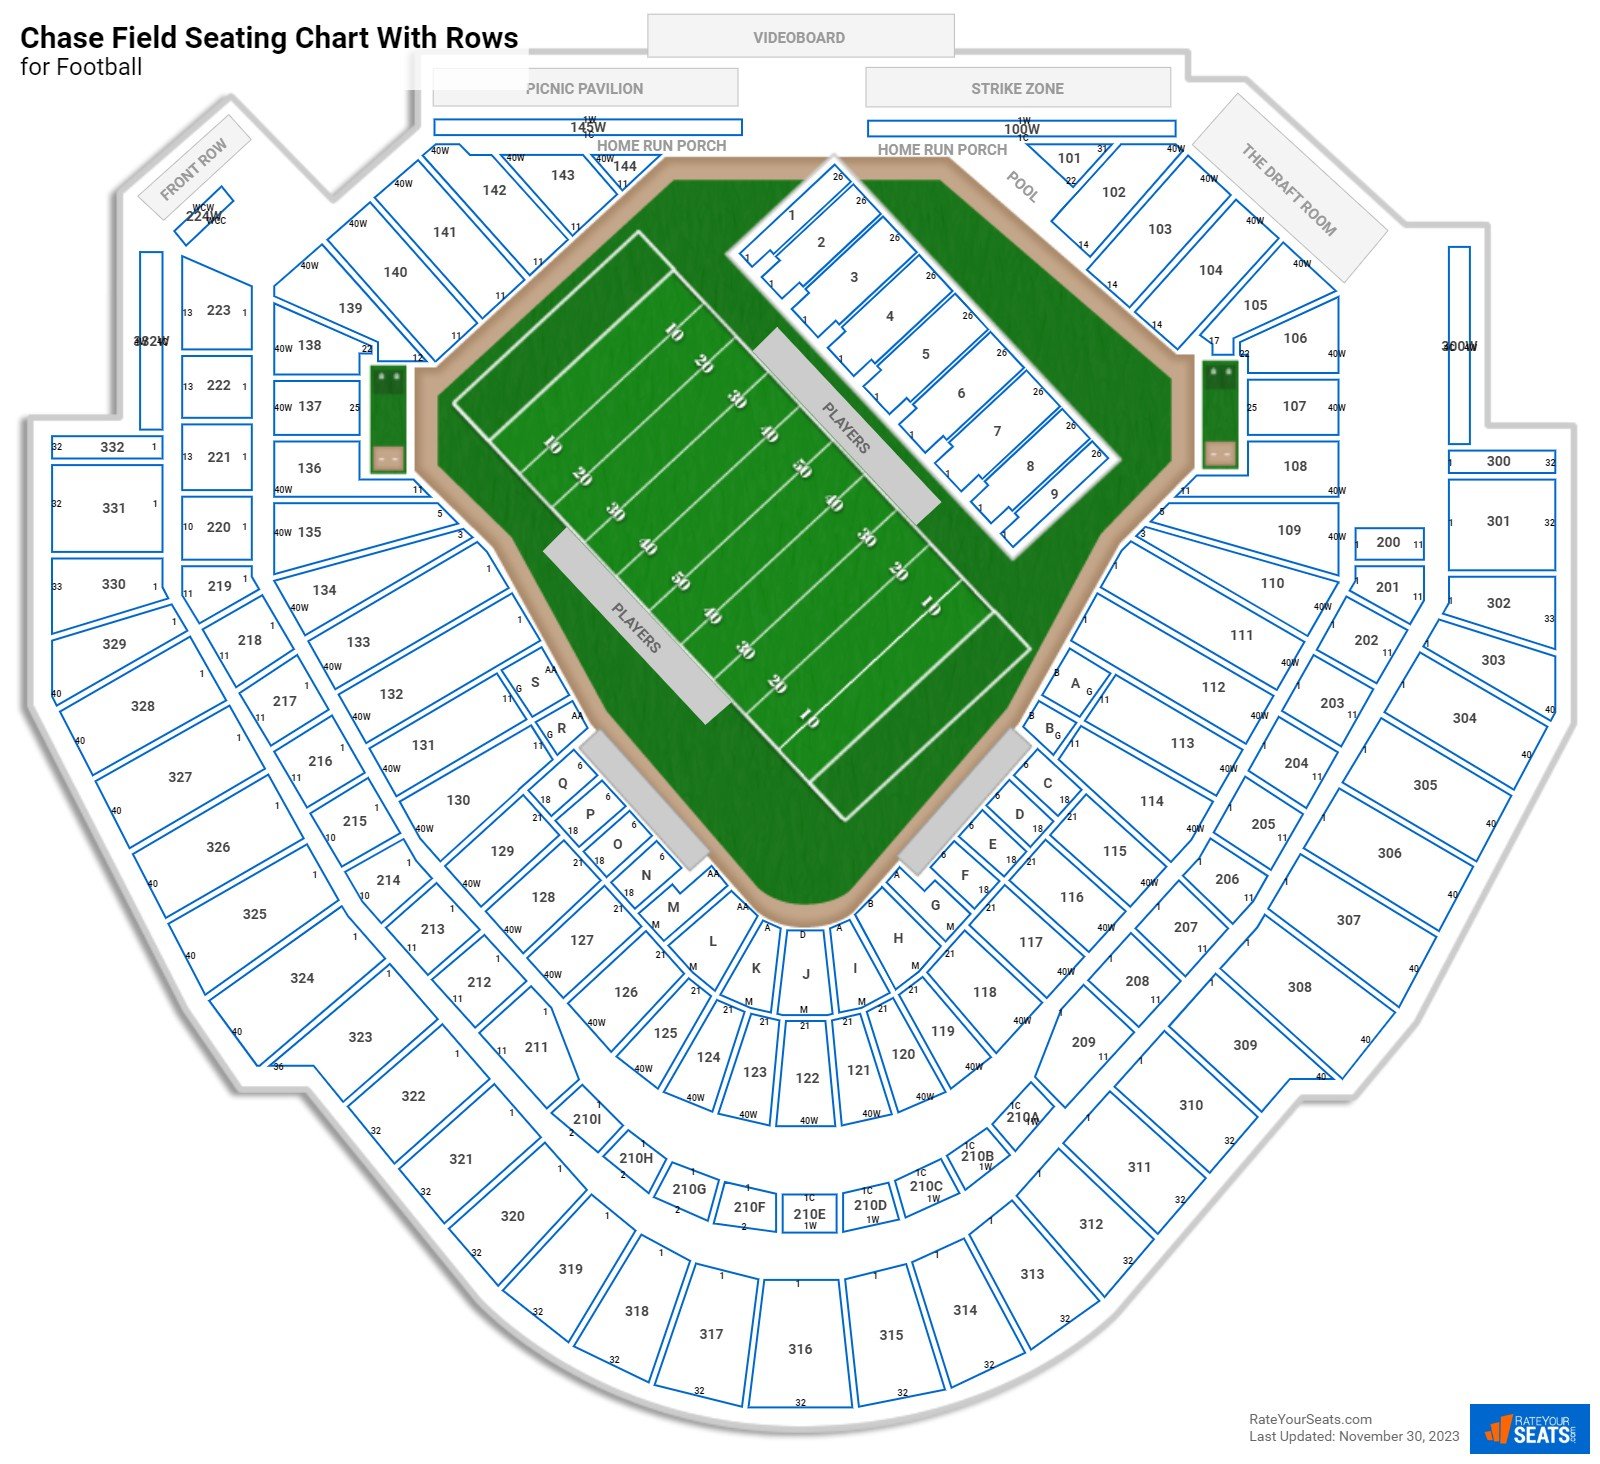 Chase Field Seating Charts for Football